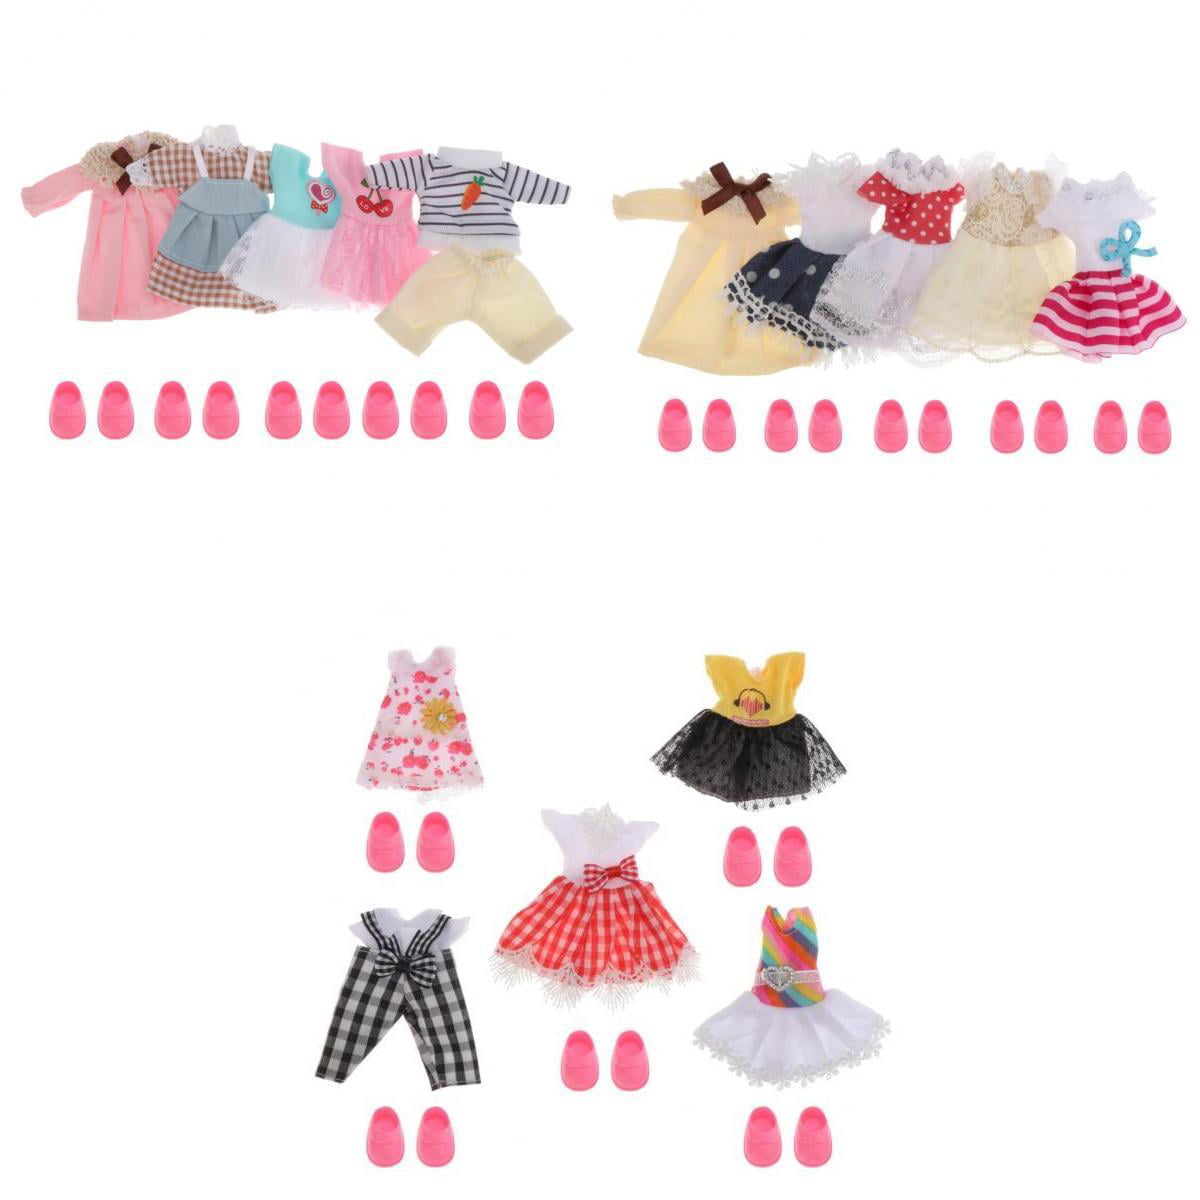 14 Sets Mini Girl Dolls Clothes Outfits with Shoes Fit for 6inch Doll Dress Up